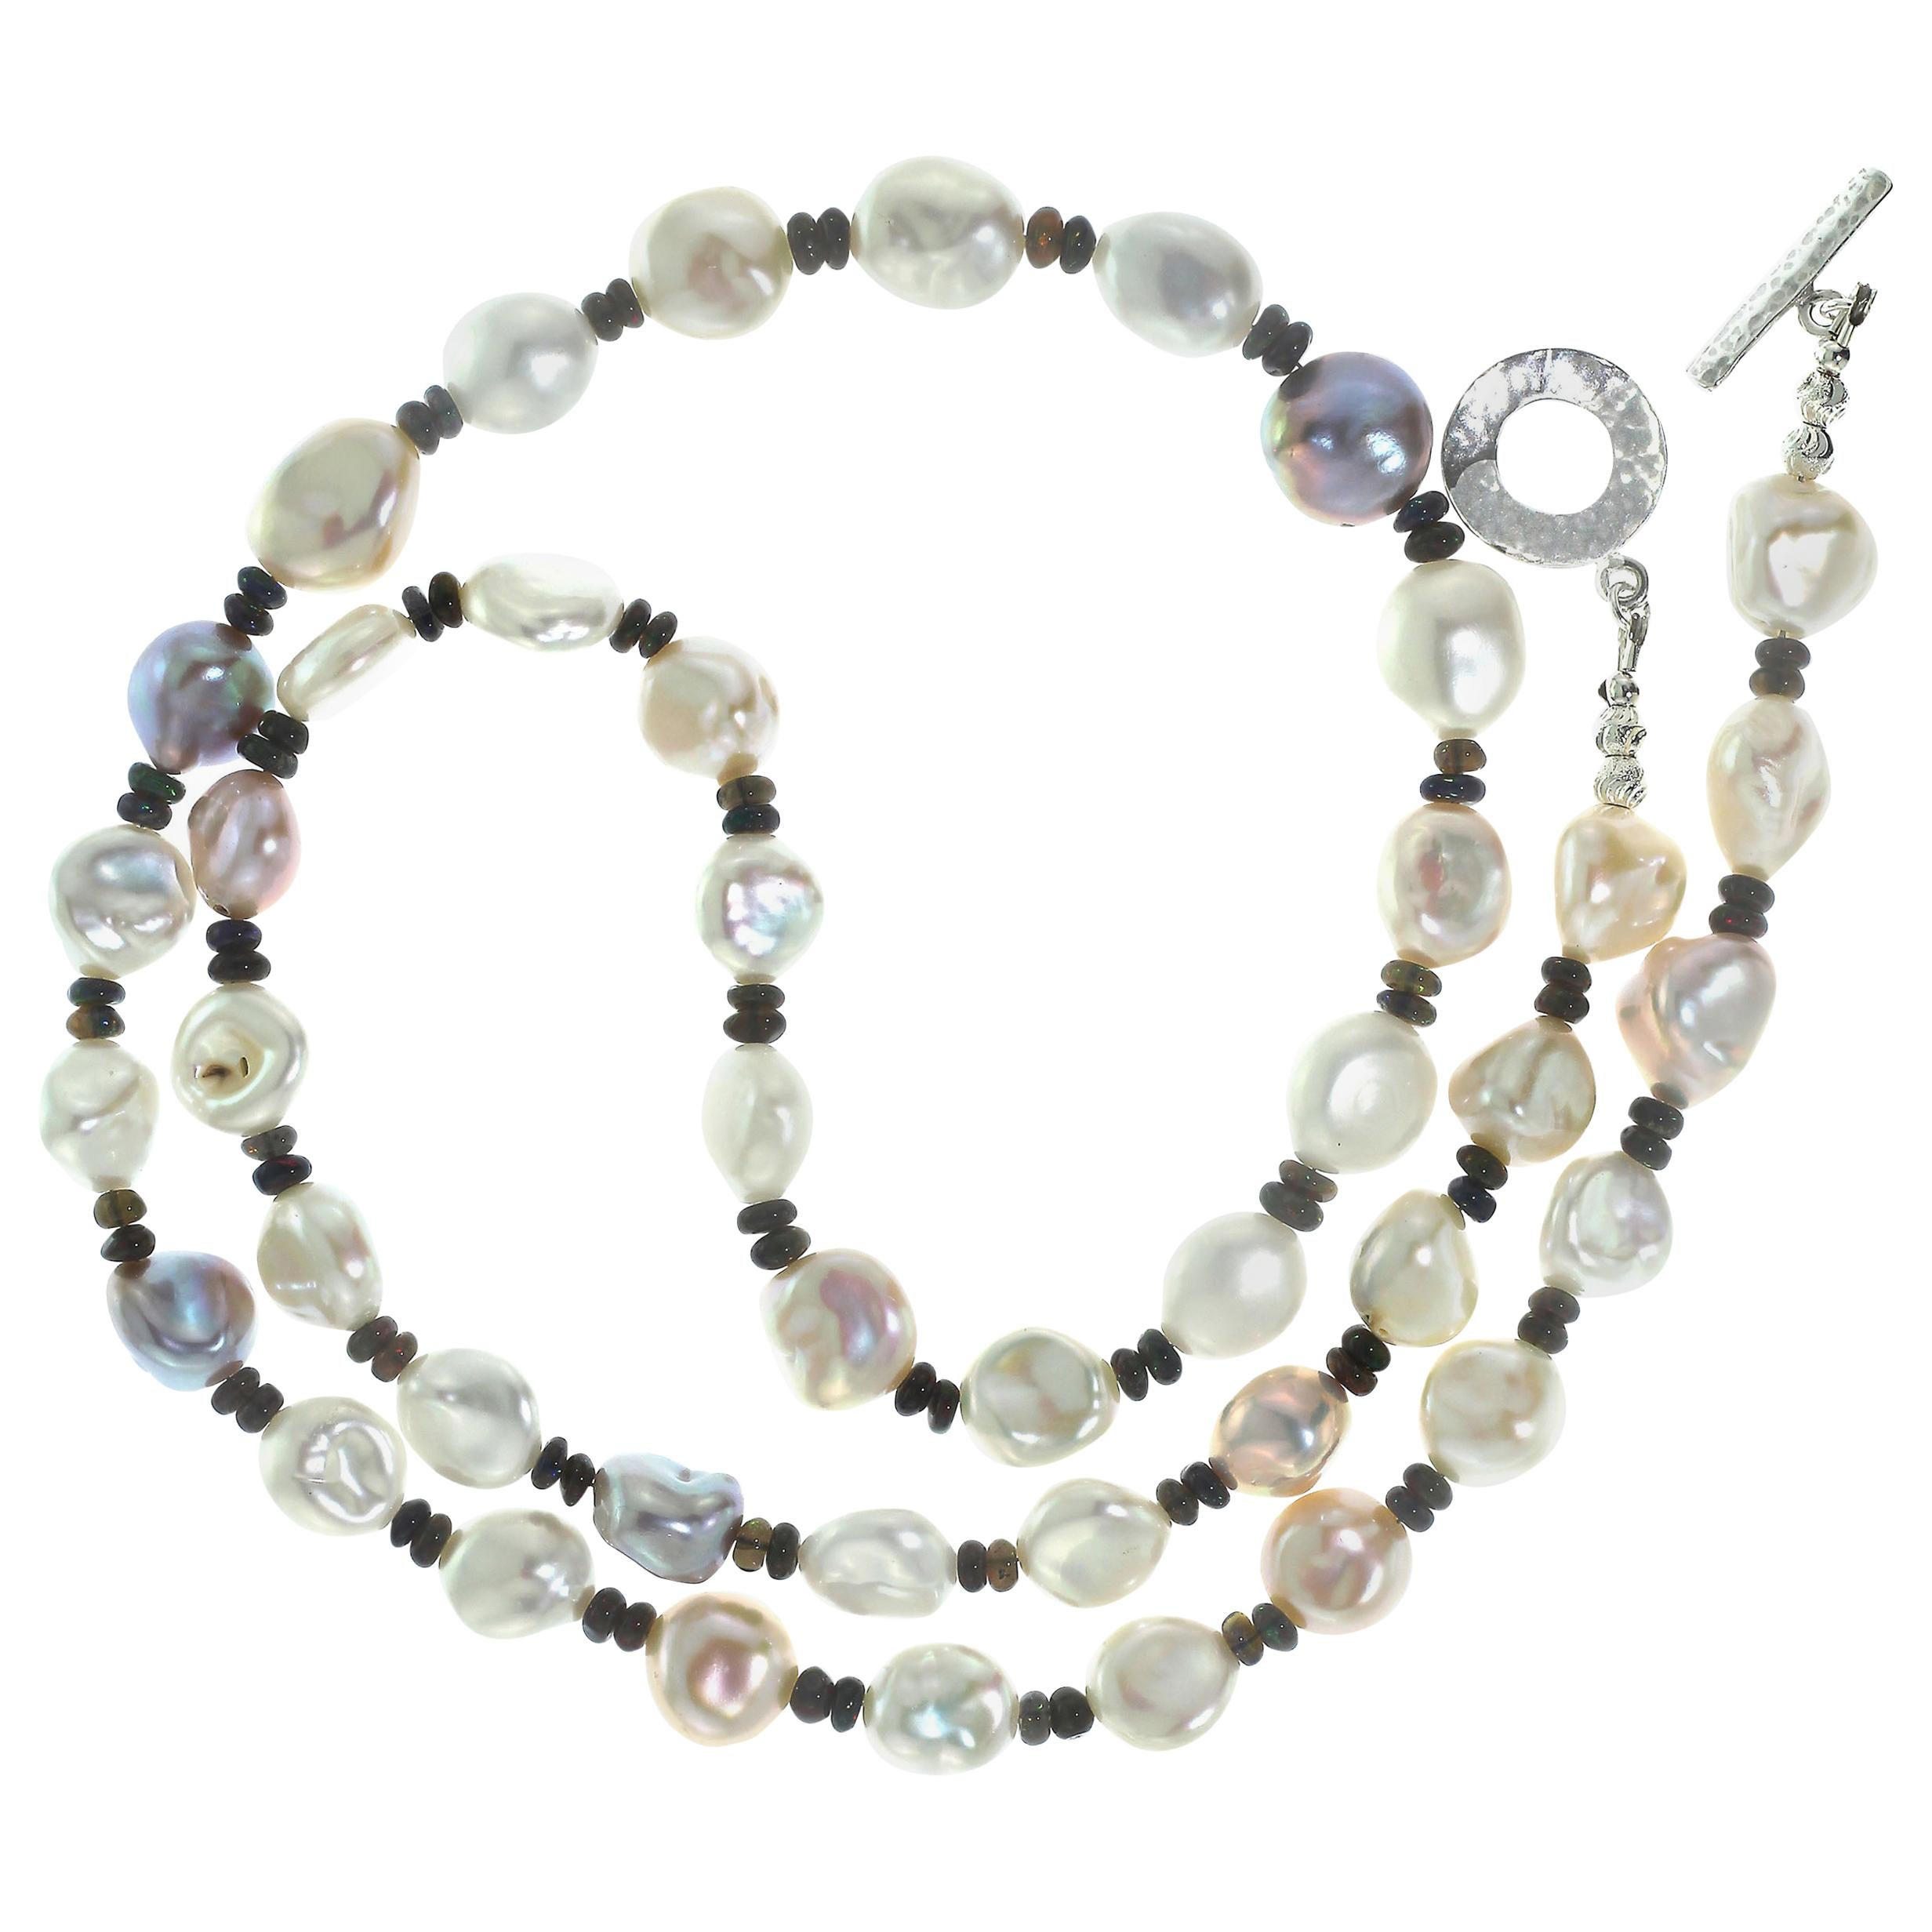 Artisan Glowing, Freshwater Pearl Necklace with Black Opal Accents